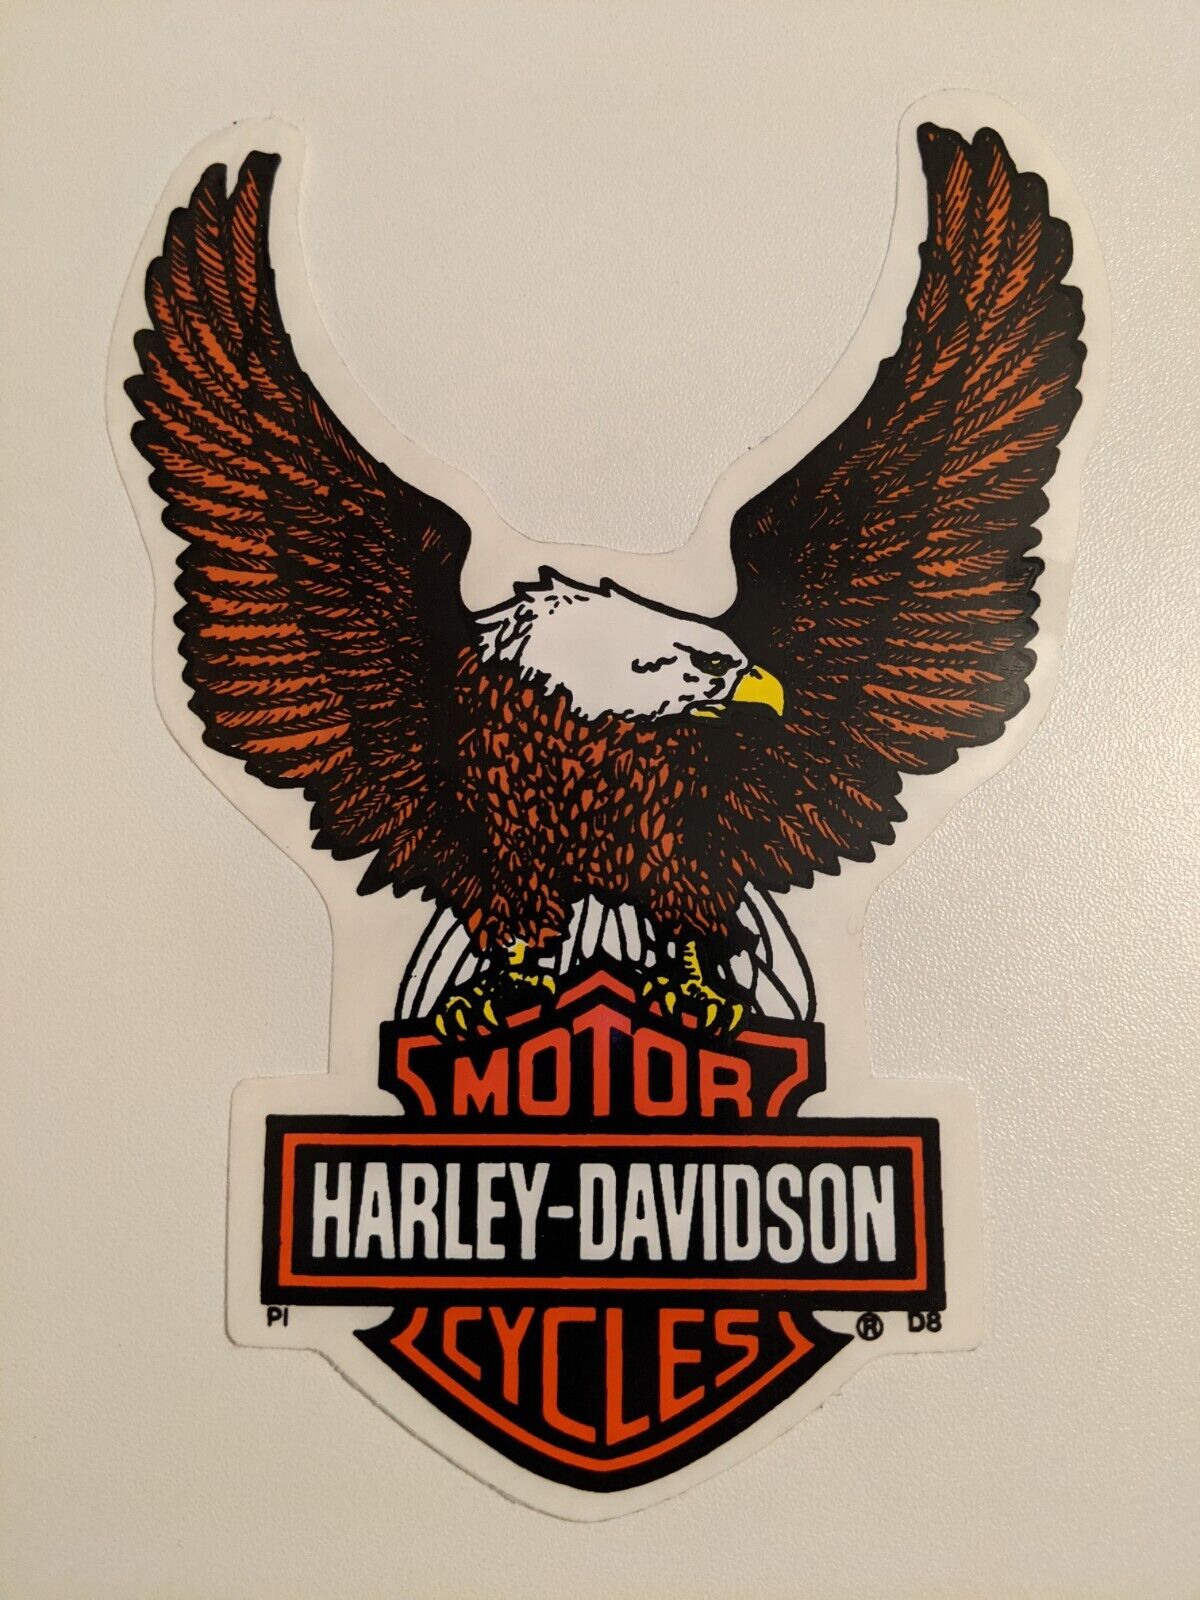 Harley Davidson Eagle Bar and Shield OUTSIDE WINDOW Decal Part #D8 ~ 6.25 inches